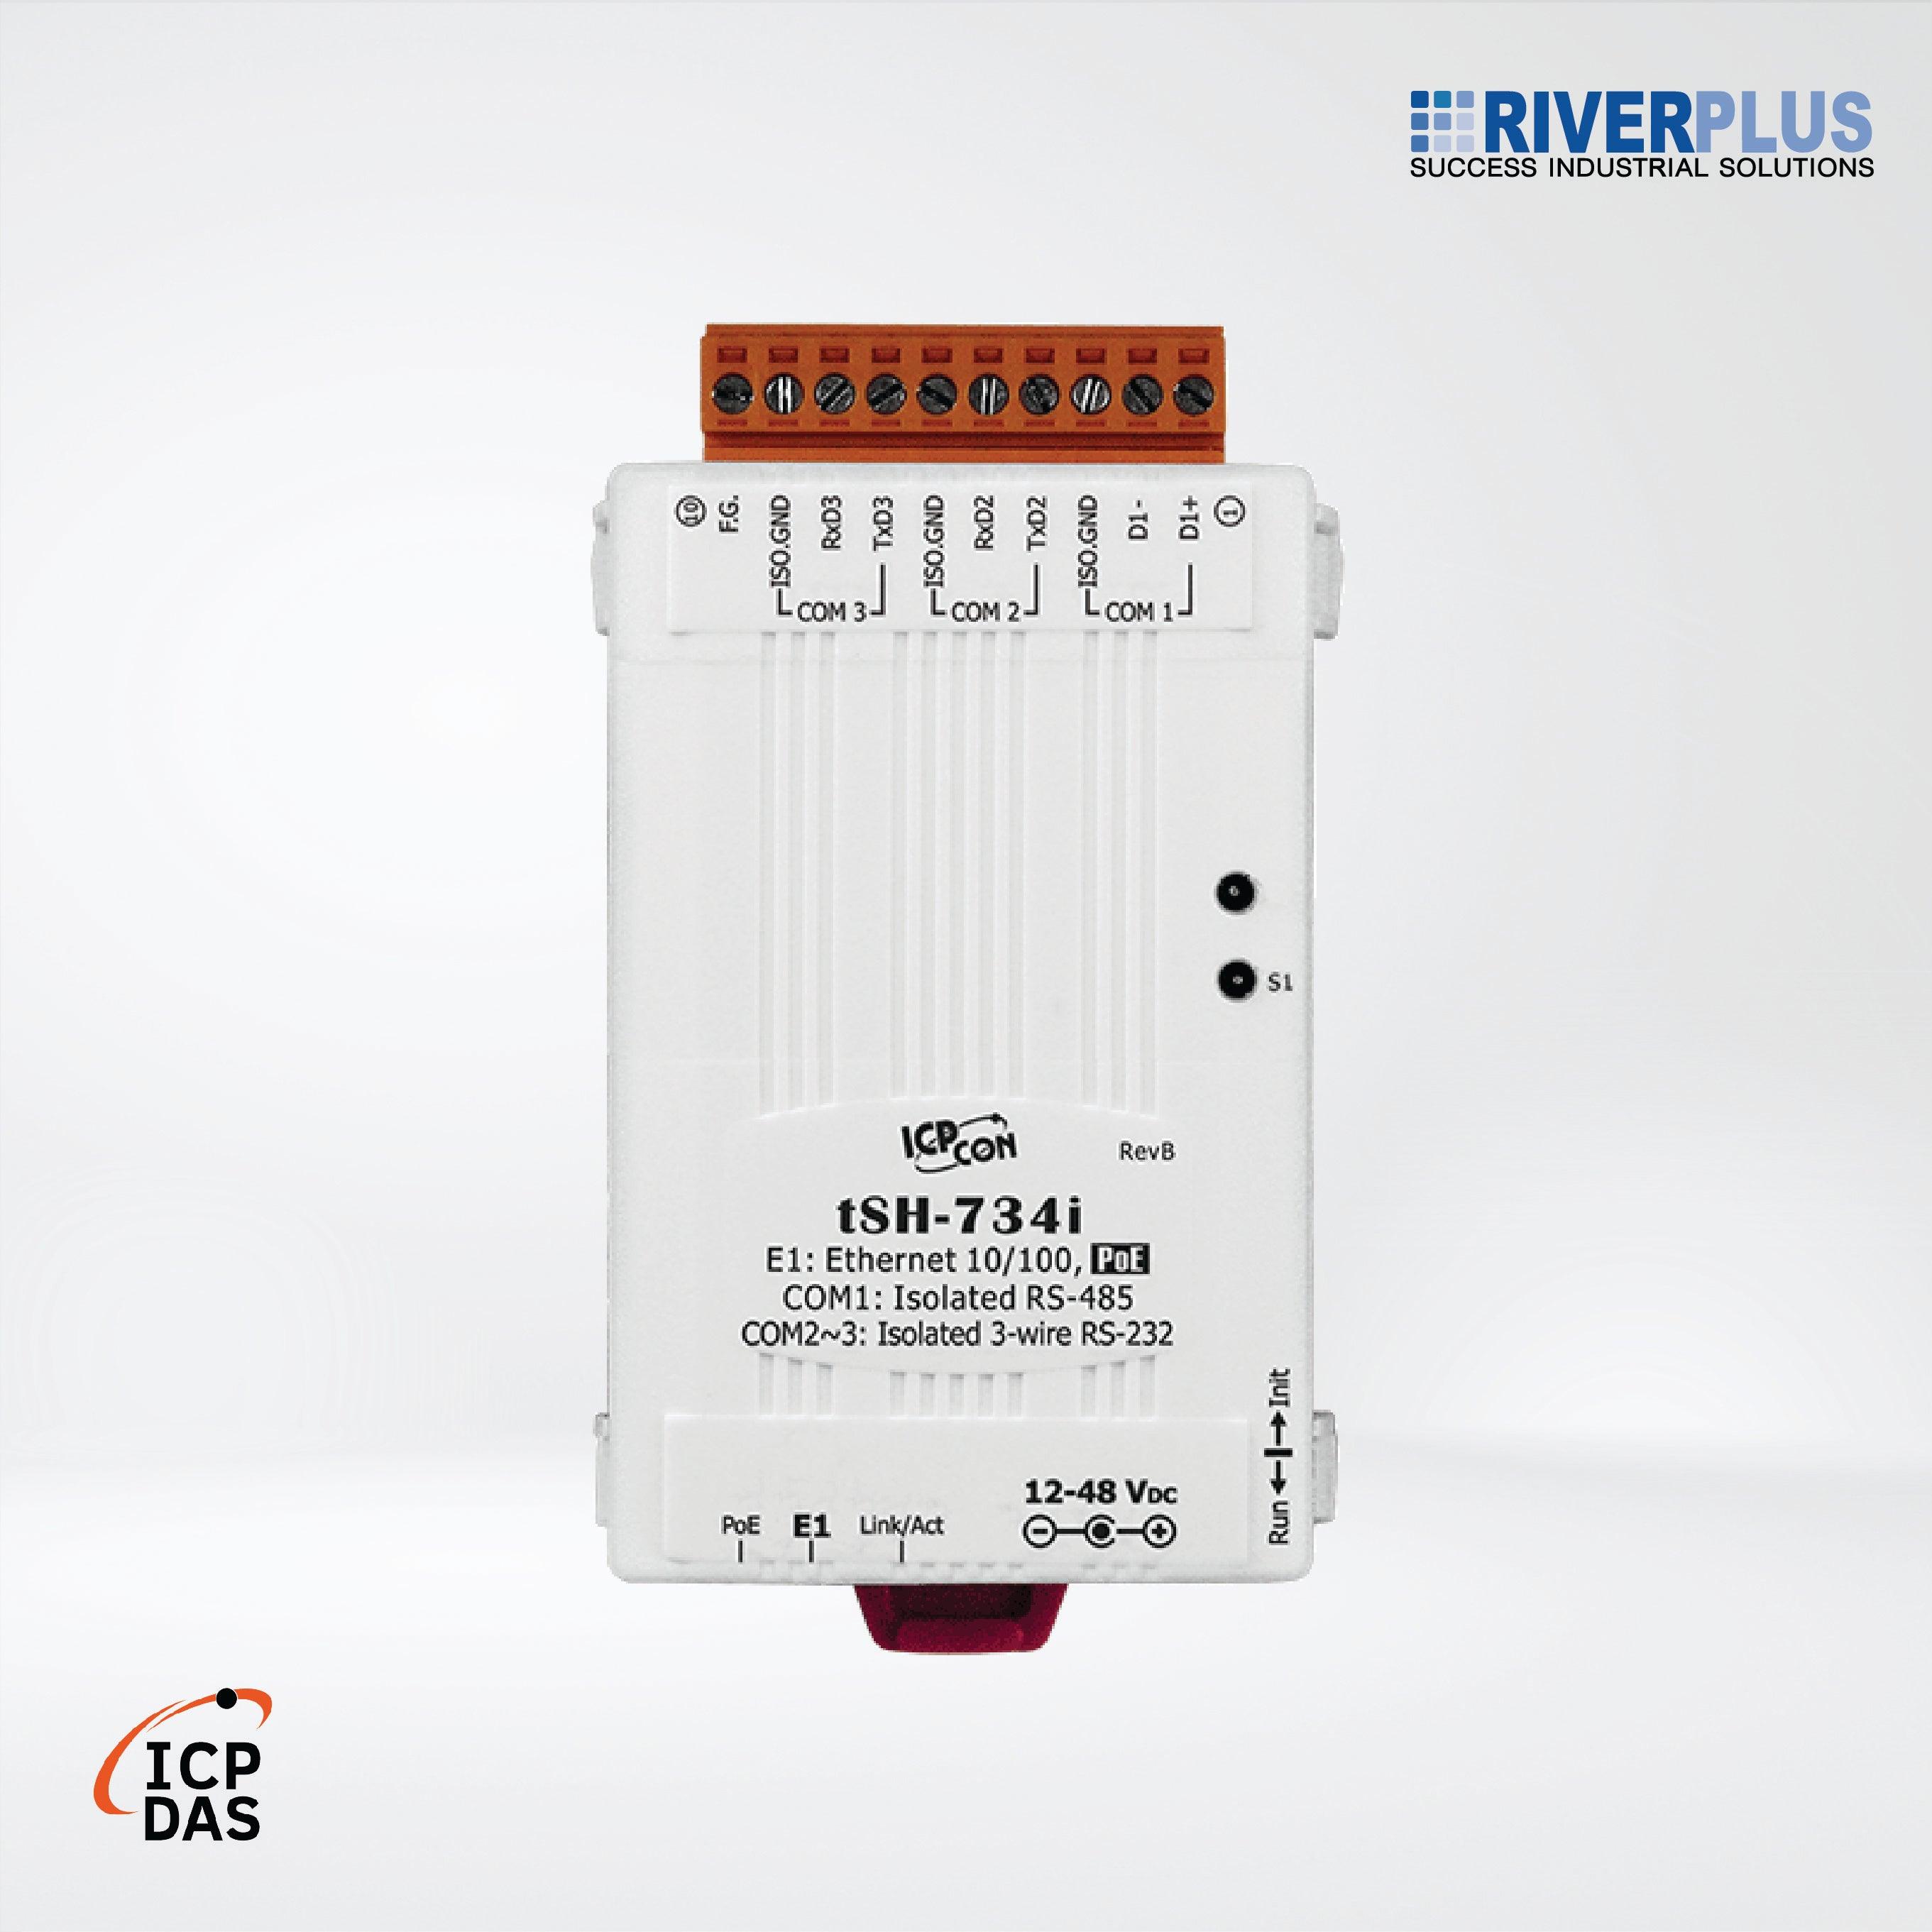 tSH-734i Tiny (2x Isolated RS-232 and 1x Isolated RS-485) Serial Port Sharer with PoE - Riverplus